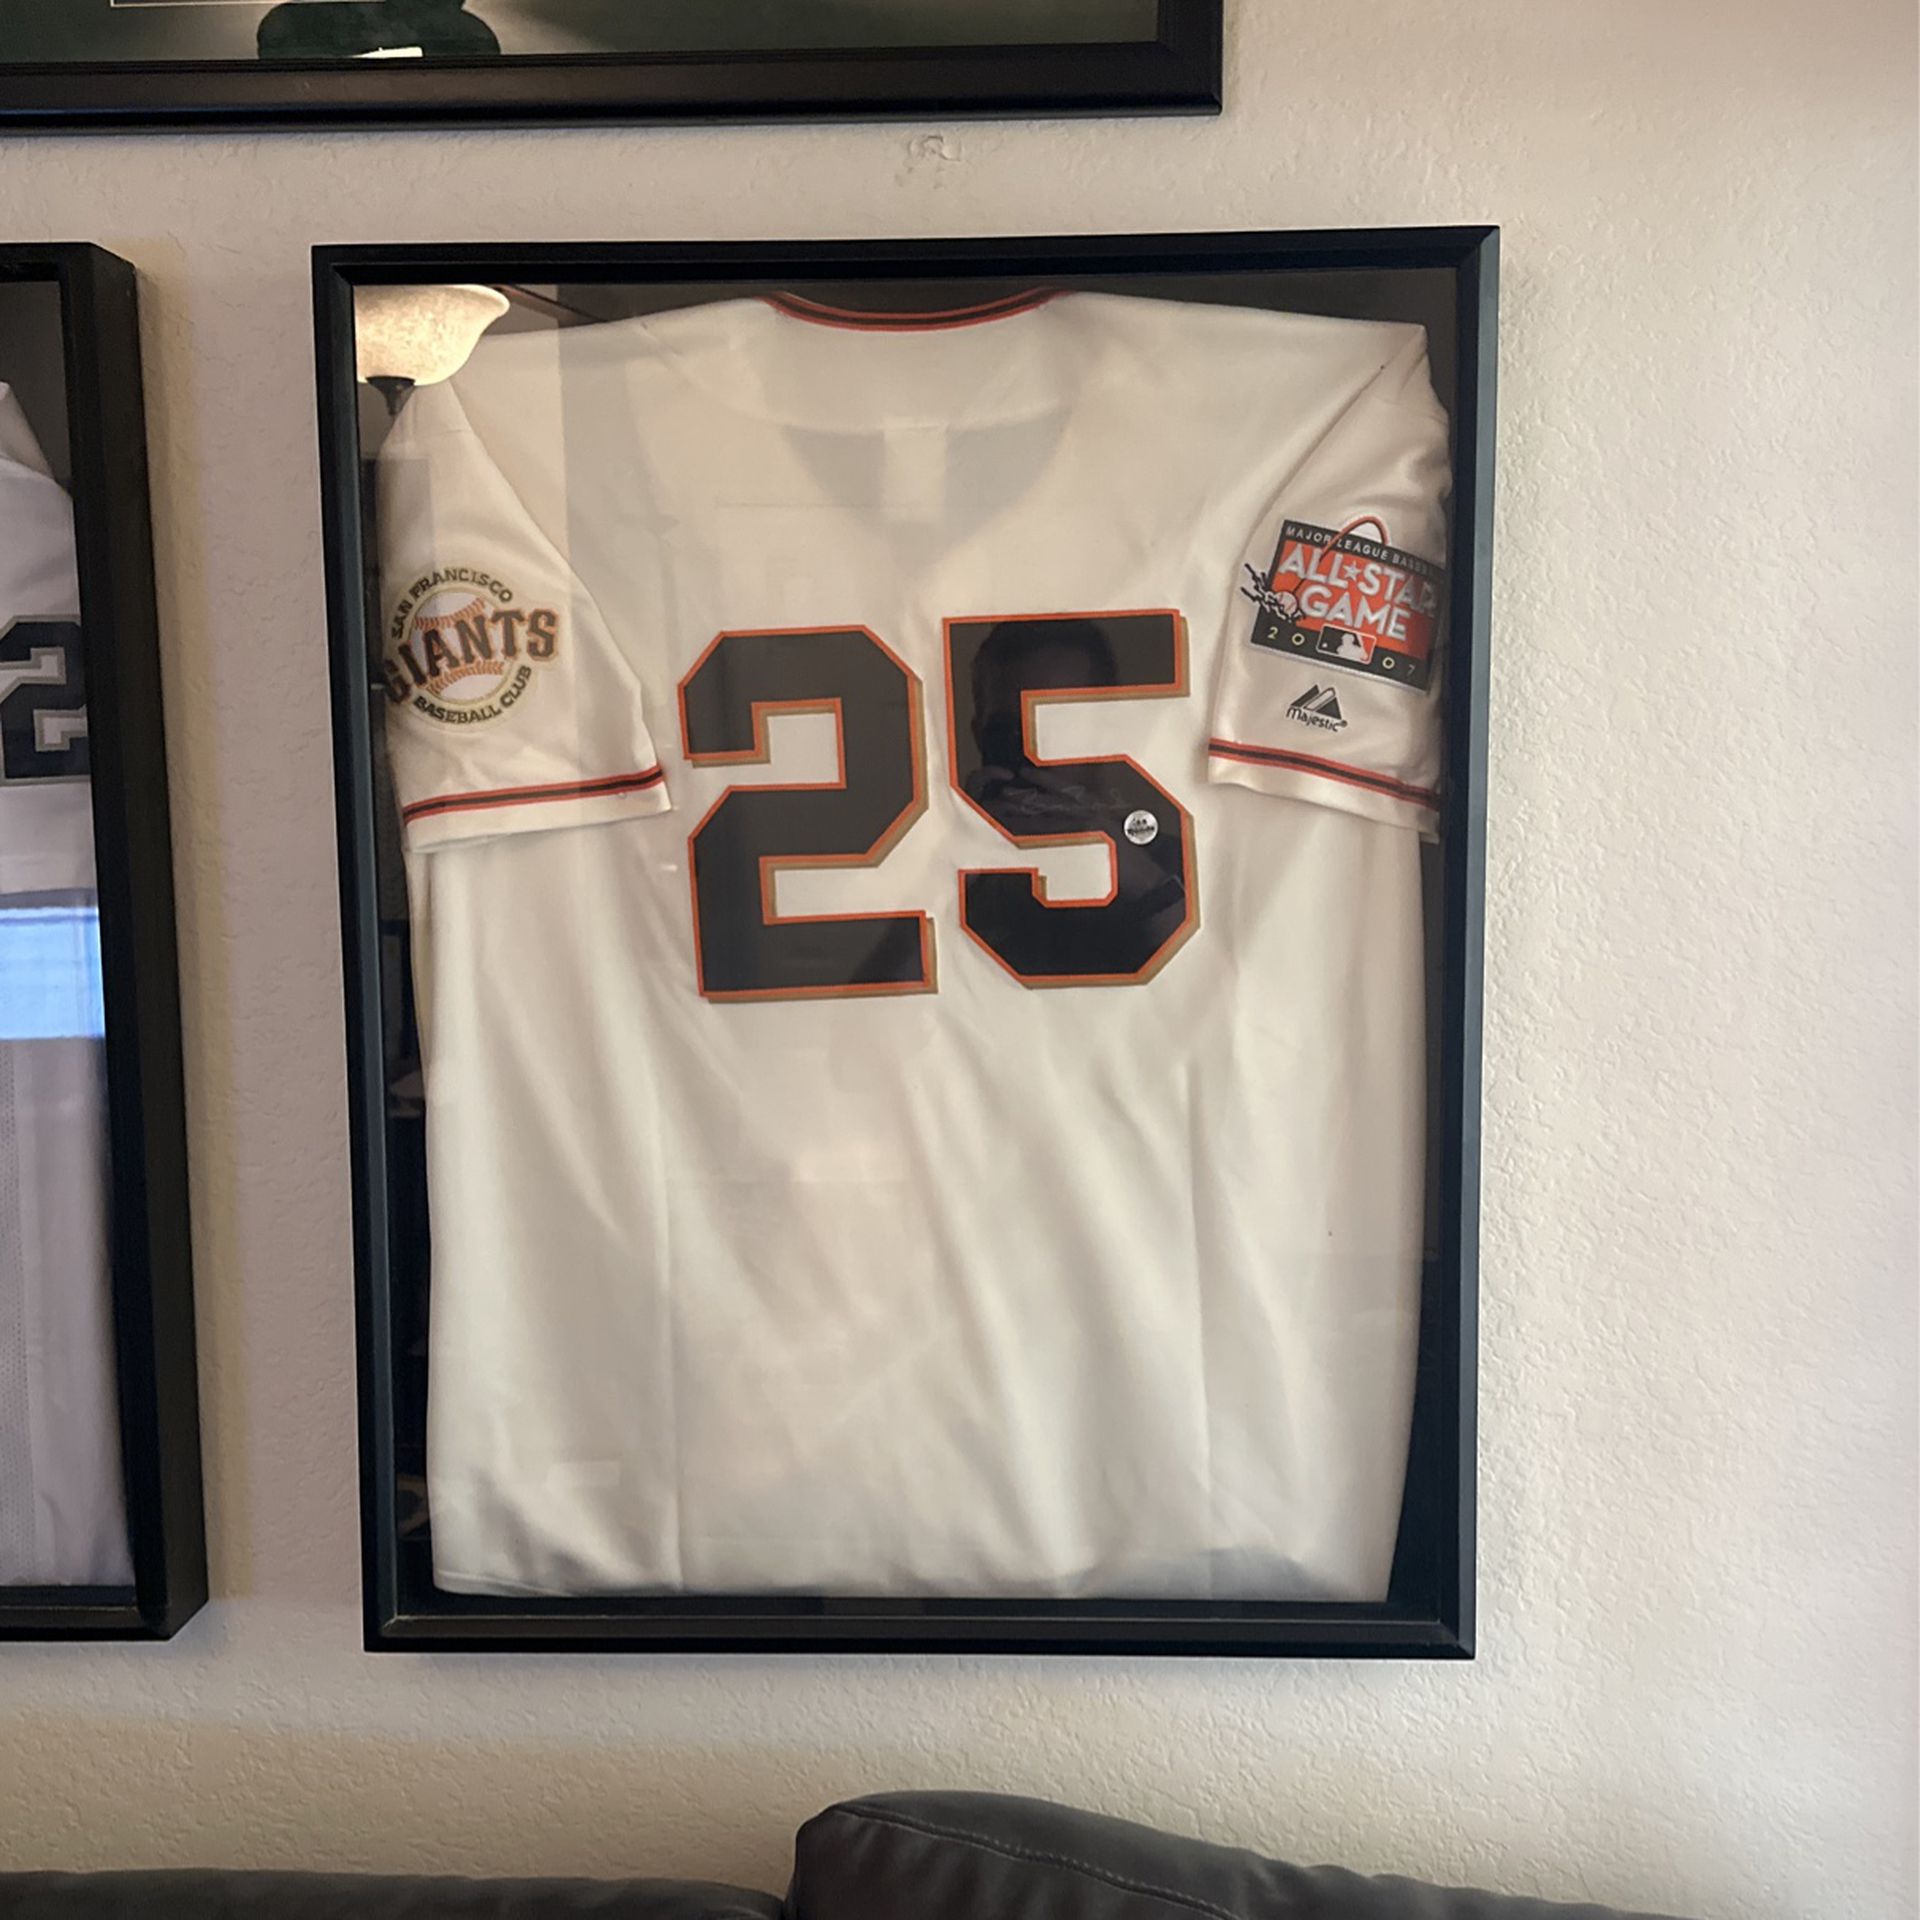 Framed Barry Bonds Autographed Jersey for Sale in Tempe, AZ - OfferUp